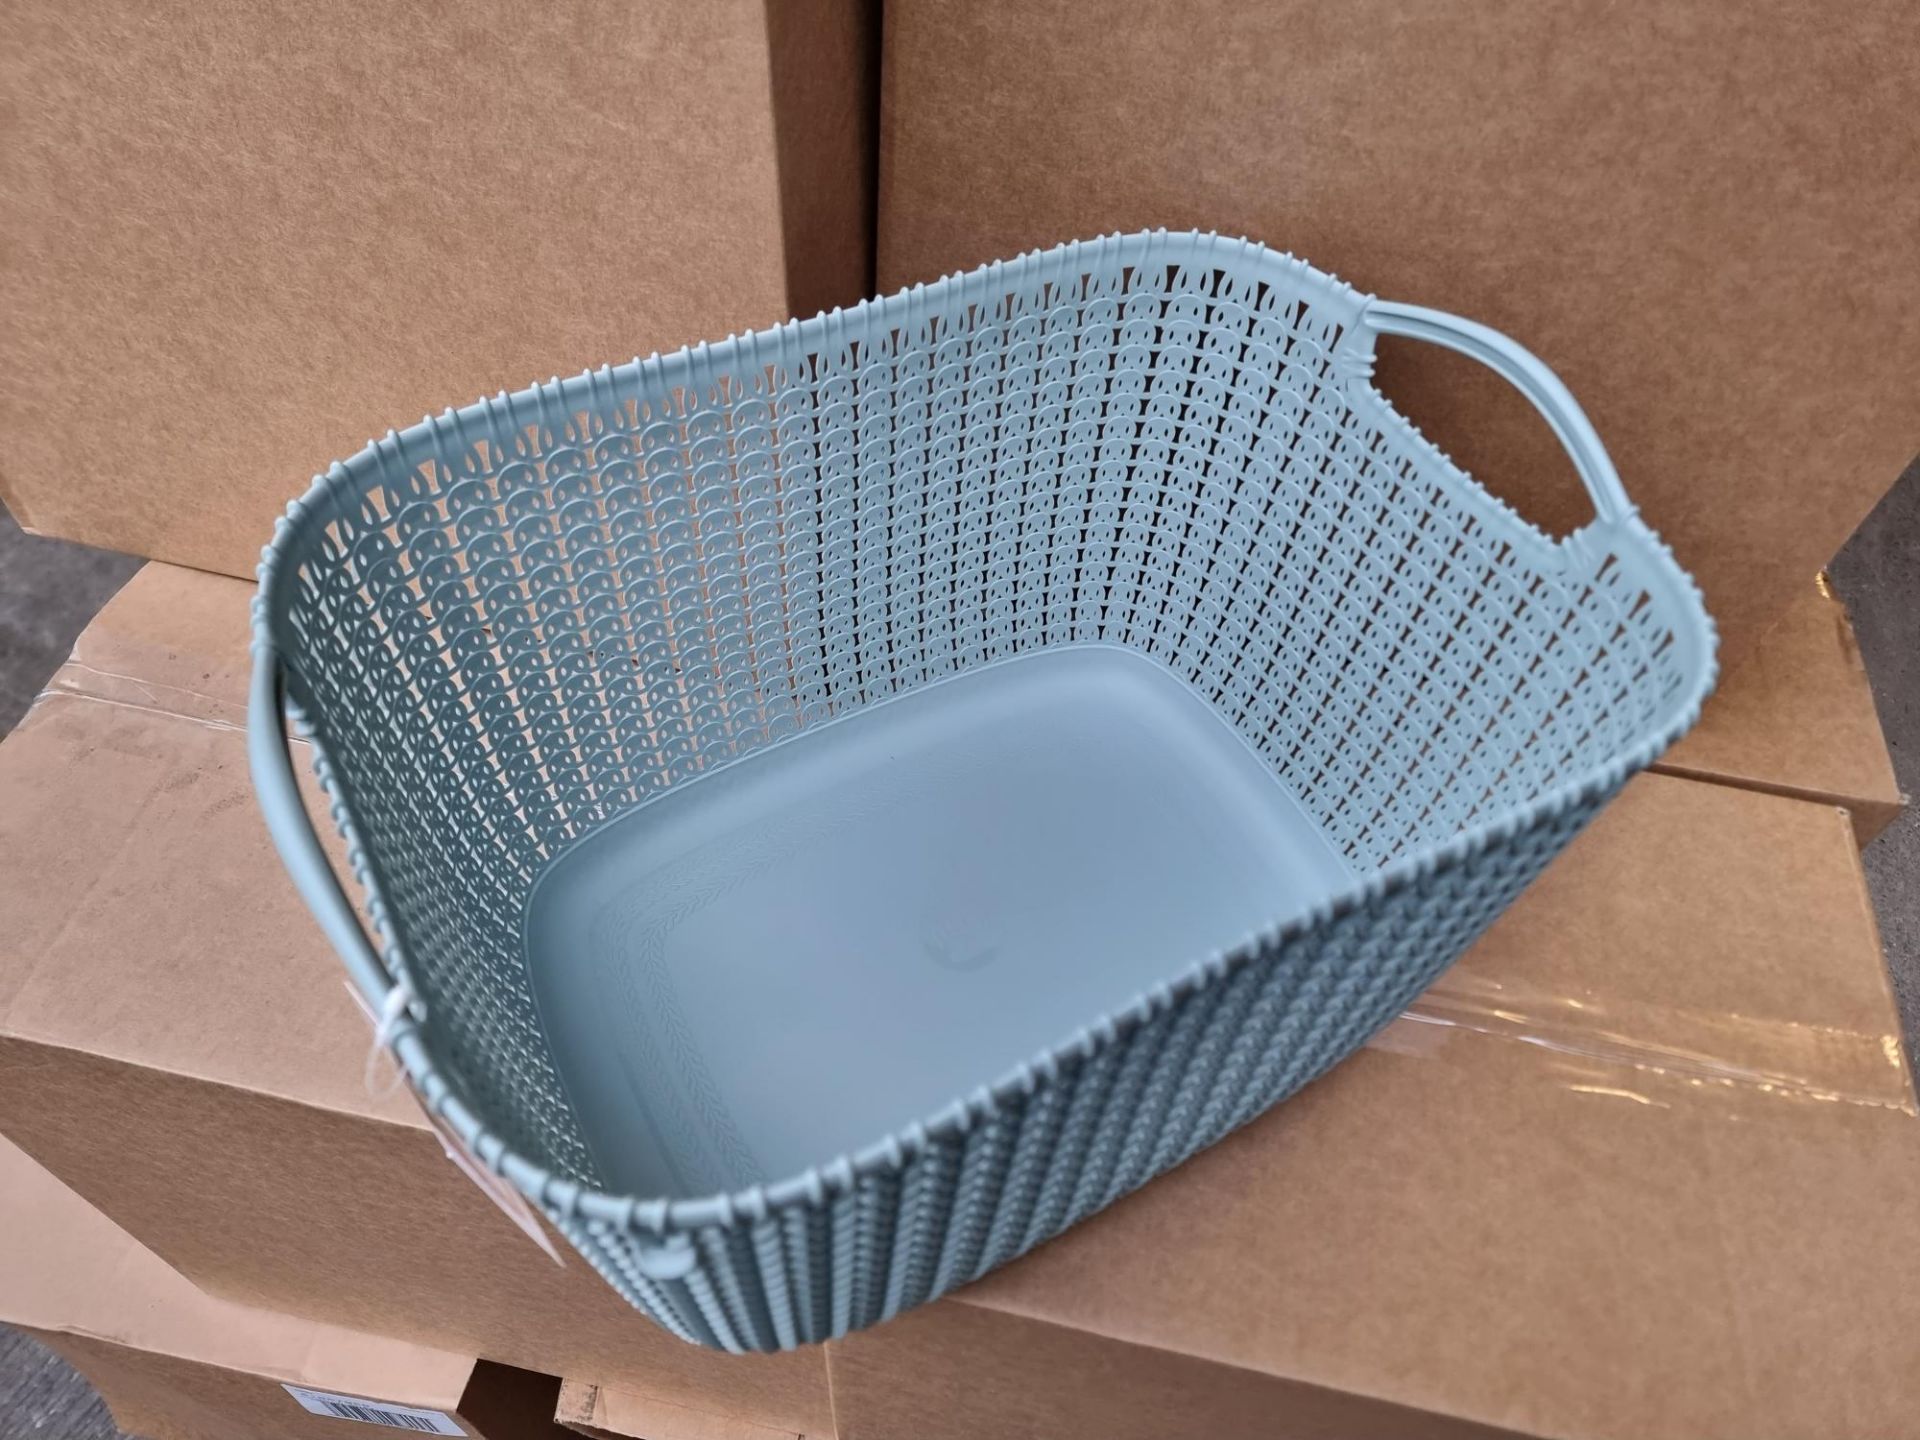 PALLET TO CONTAIN 100 X NEW PACKAGED Curver Knit Rectangular Storage Basket - 19 Litres, Misty Blue. - Image 4 of 4